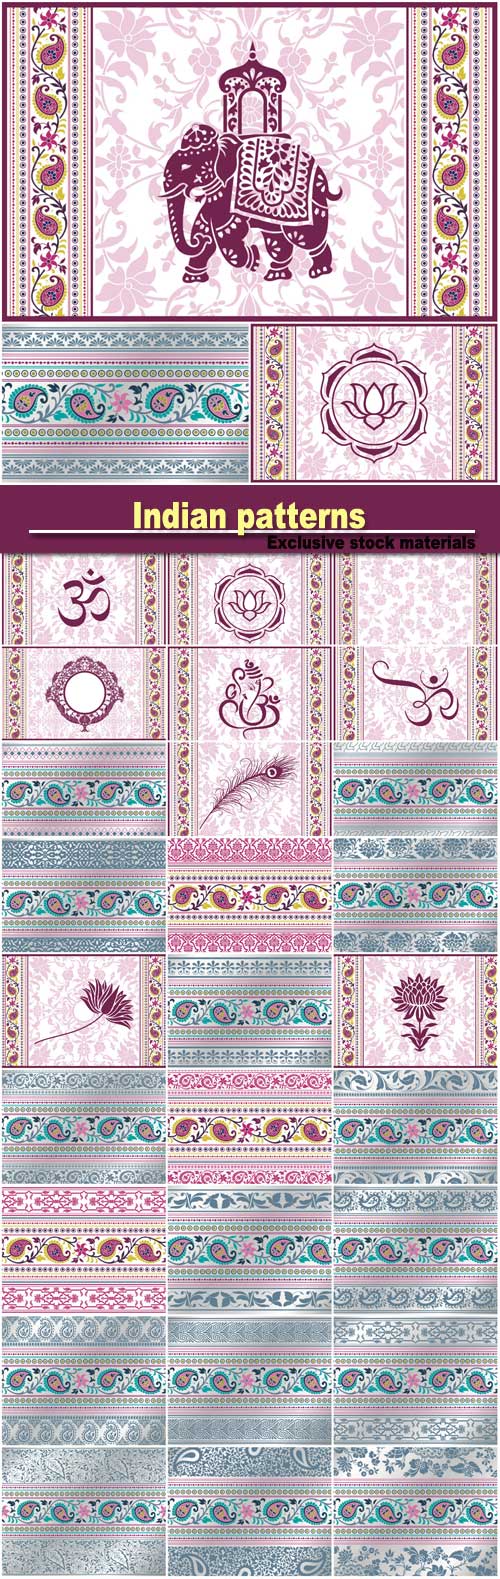 Vector background with Indian patterns and symbols